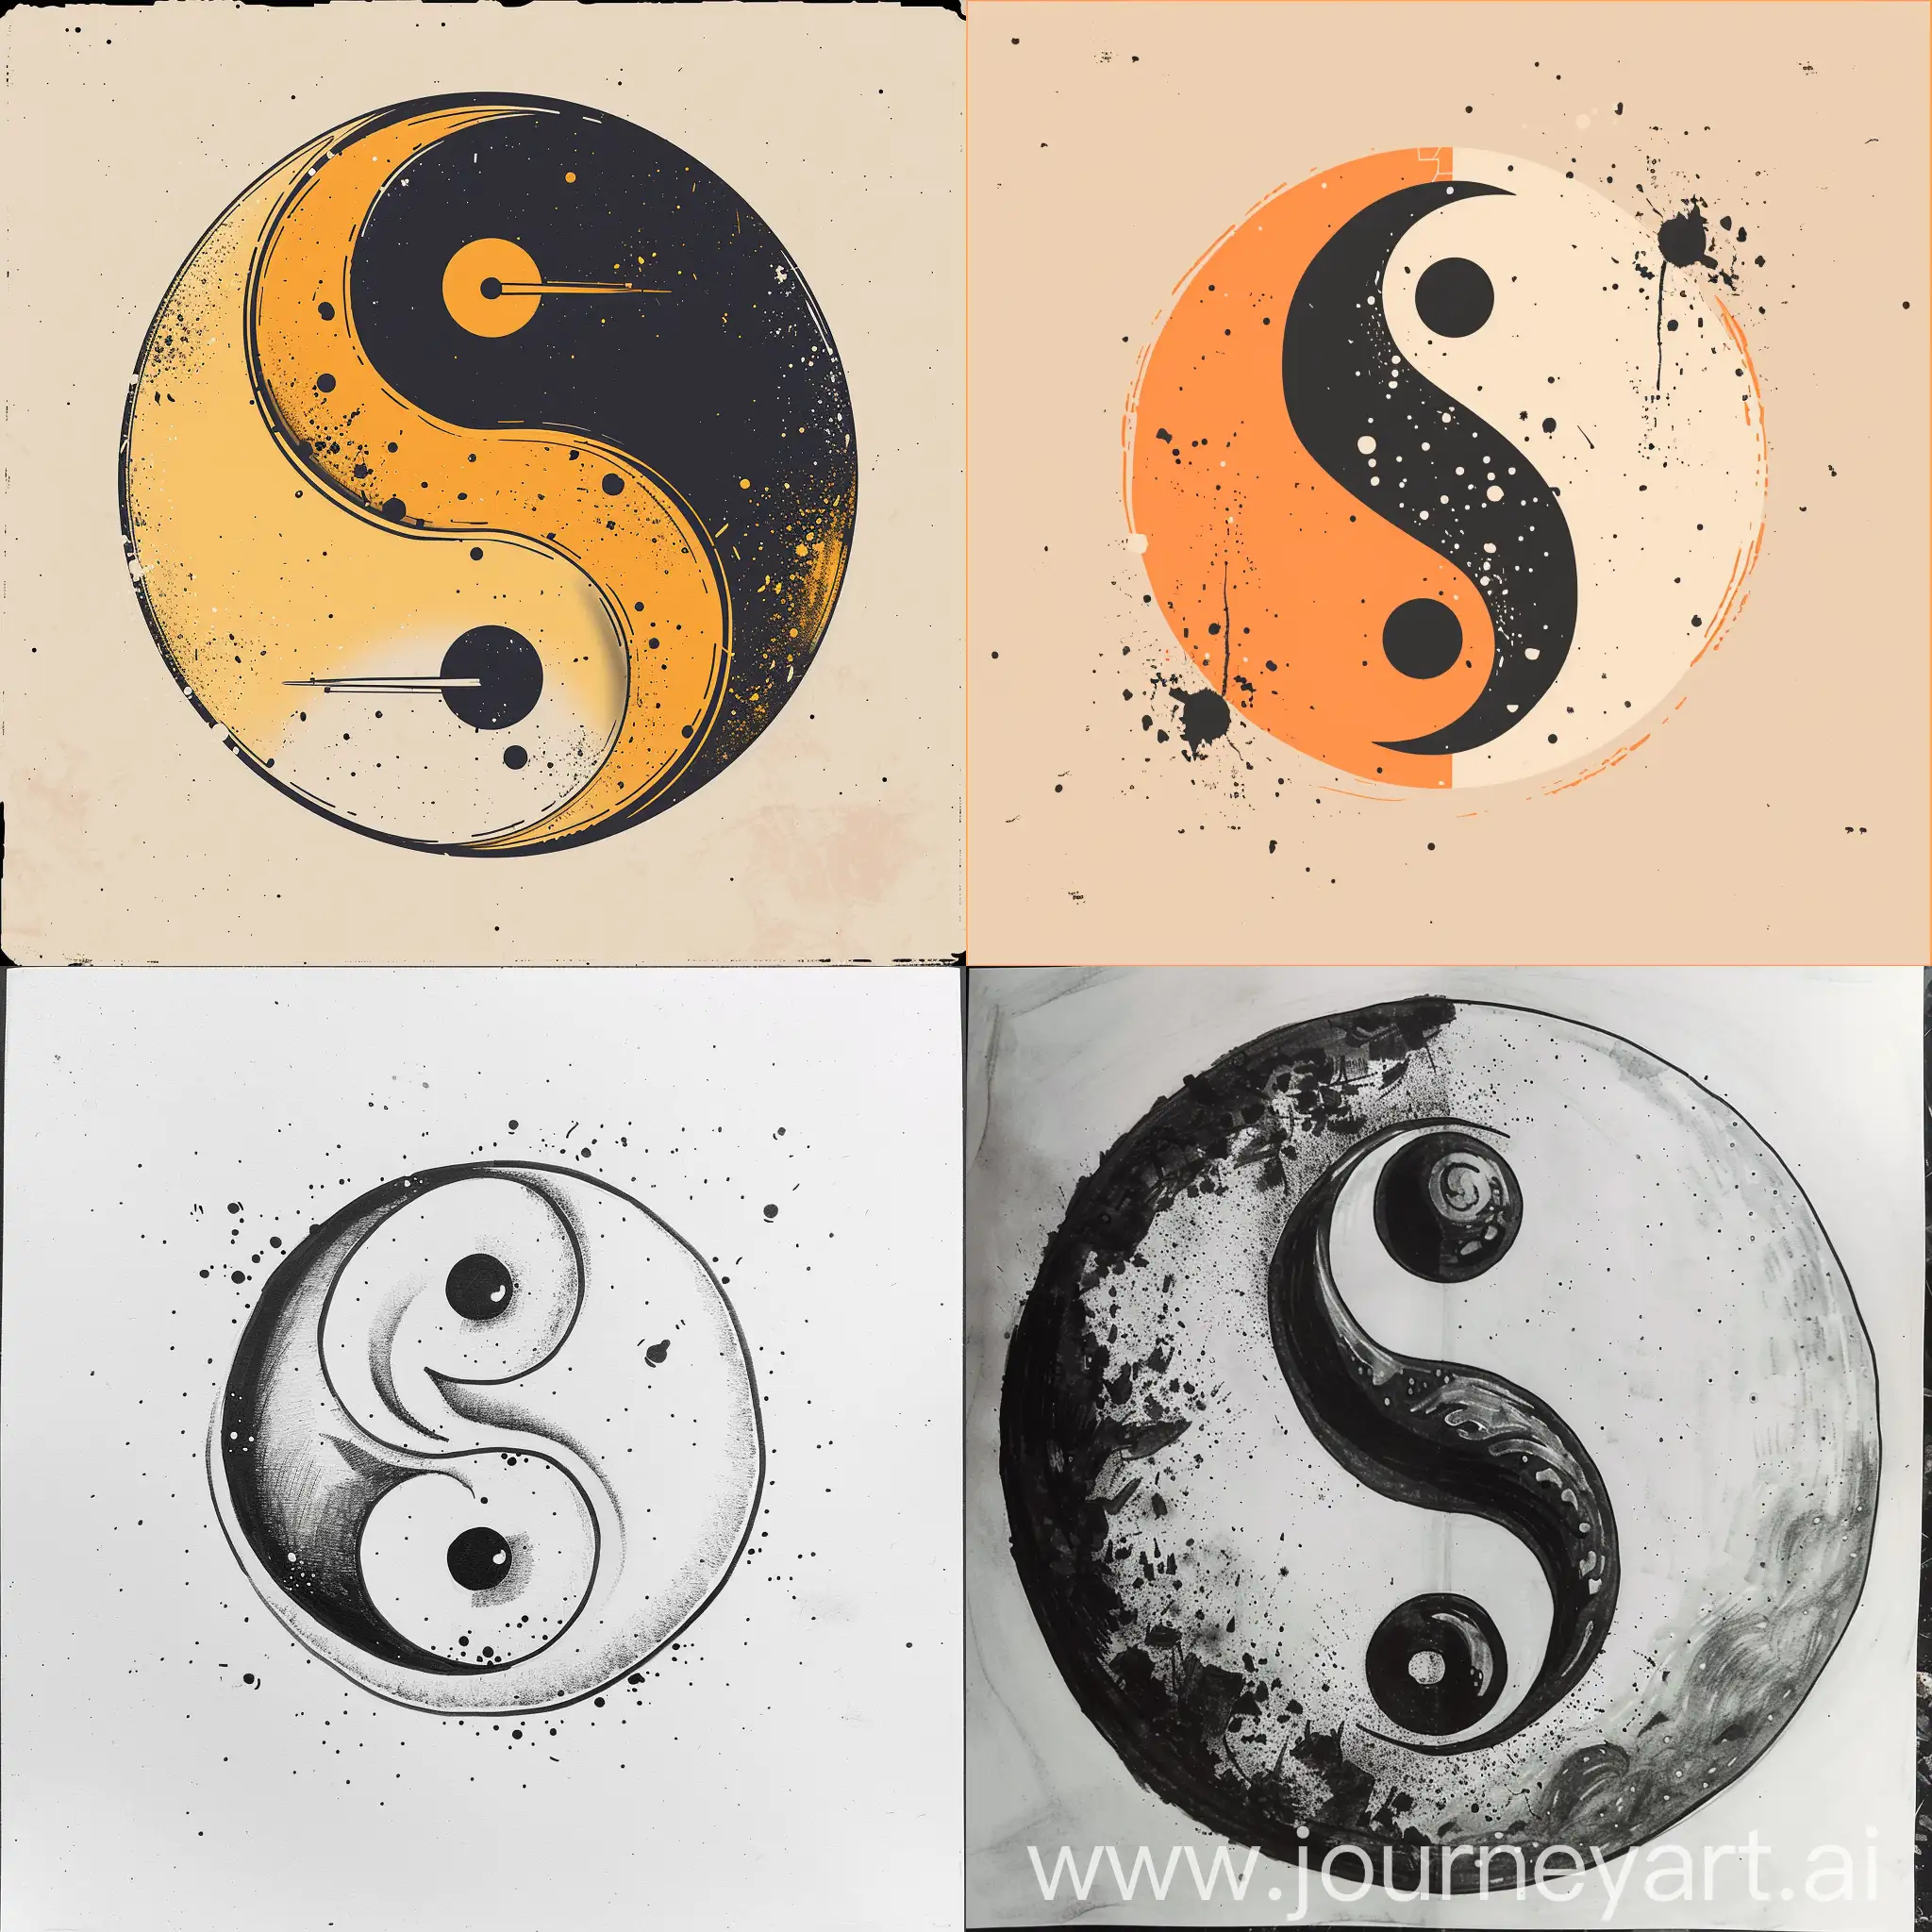 Draw the best and most beautiful design of the Yin Yang logo